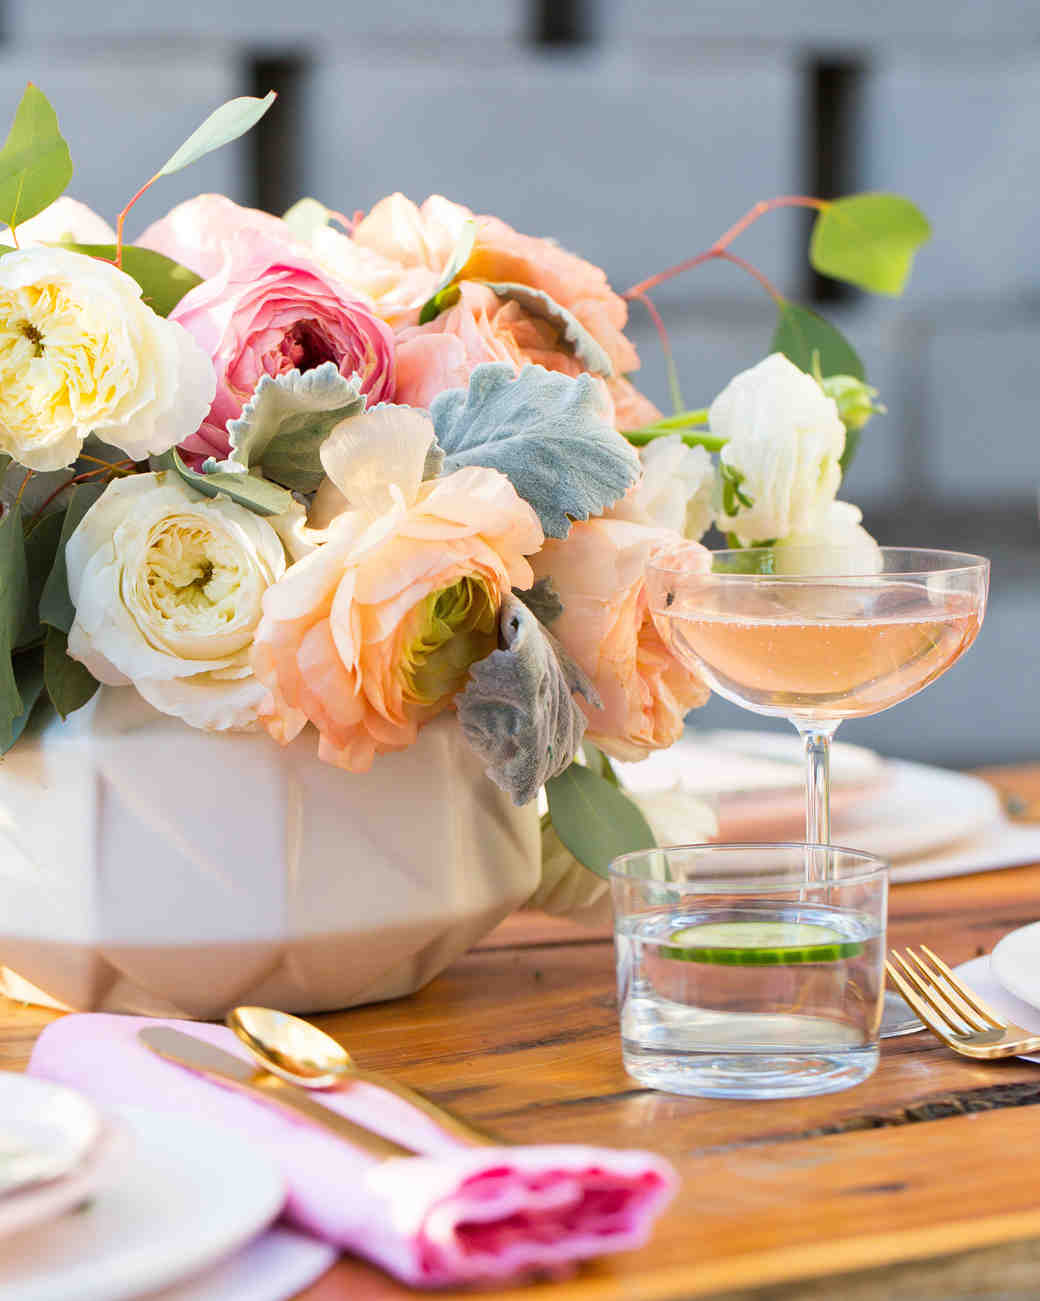 25 Bridal  Shower  Centerpieces  the Bride  to Be Will Love 